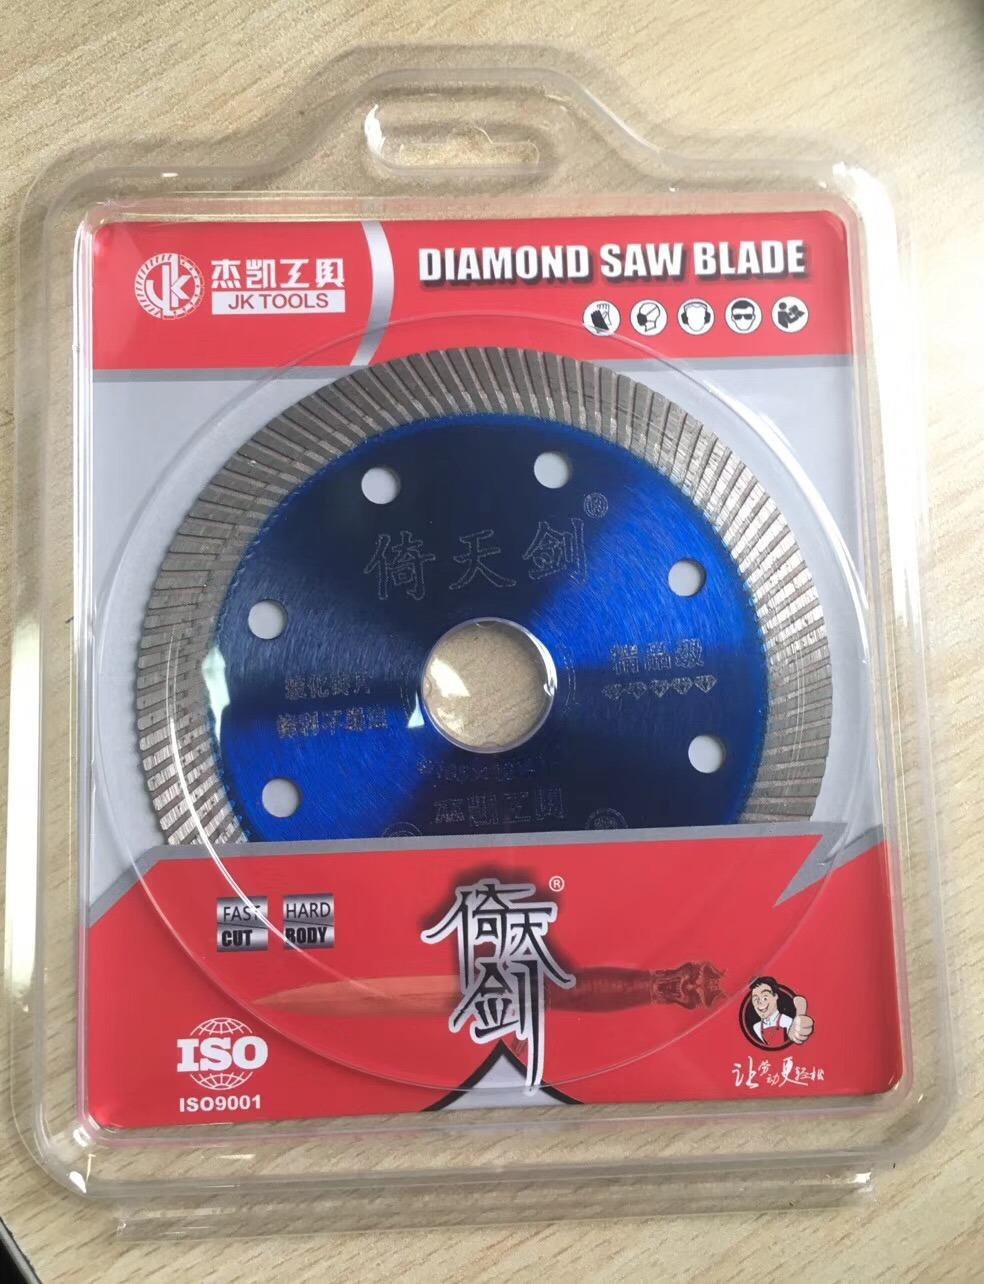 Hot Pressed Sintered Network Turbo (X turbo) Circular Diamond Saw Blade for Cutting Ceramic and Tiles